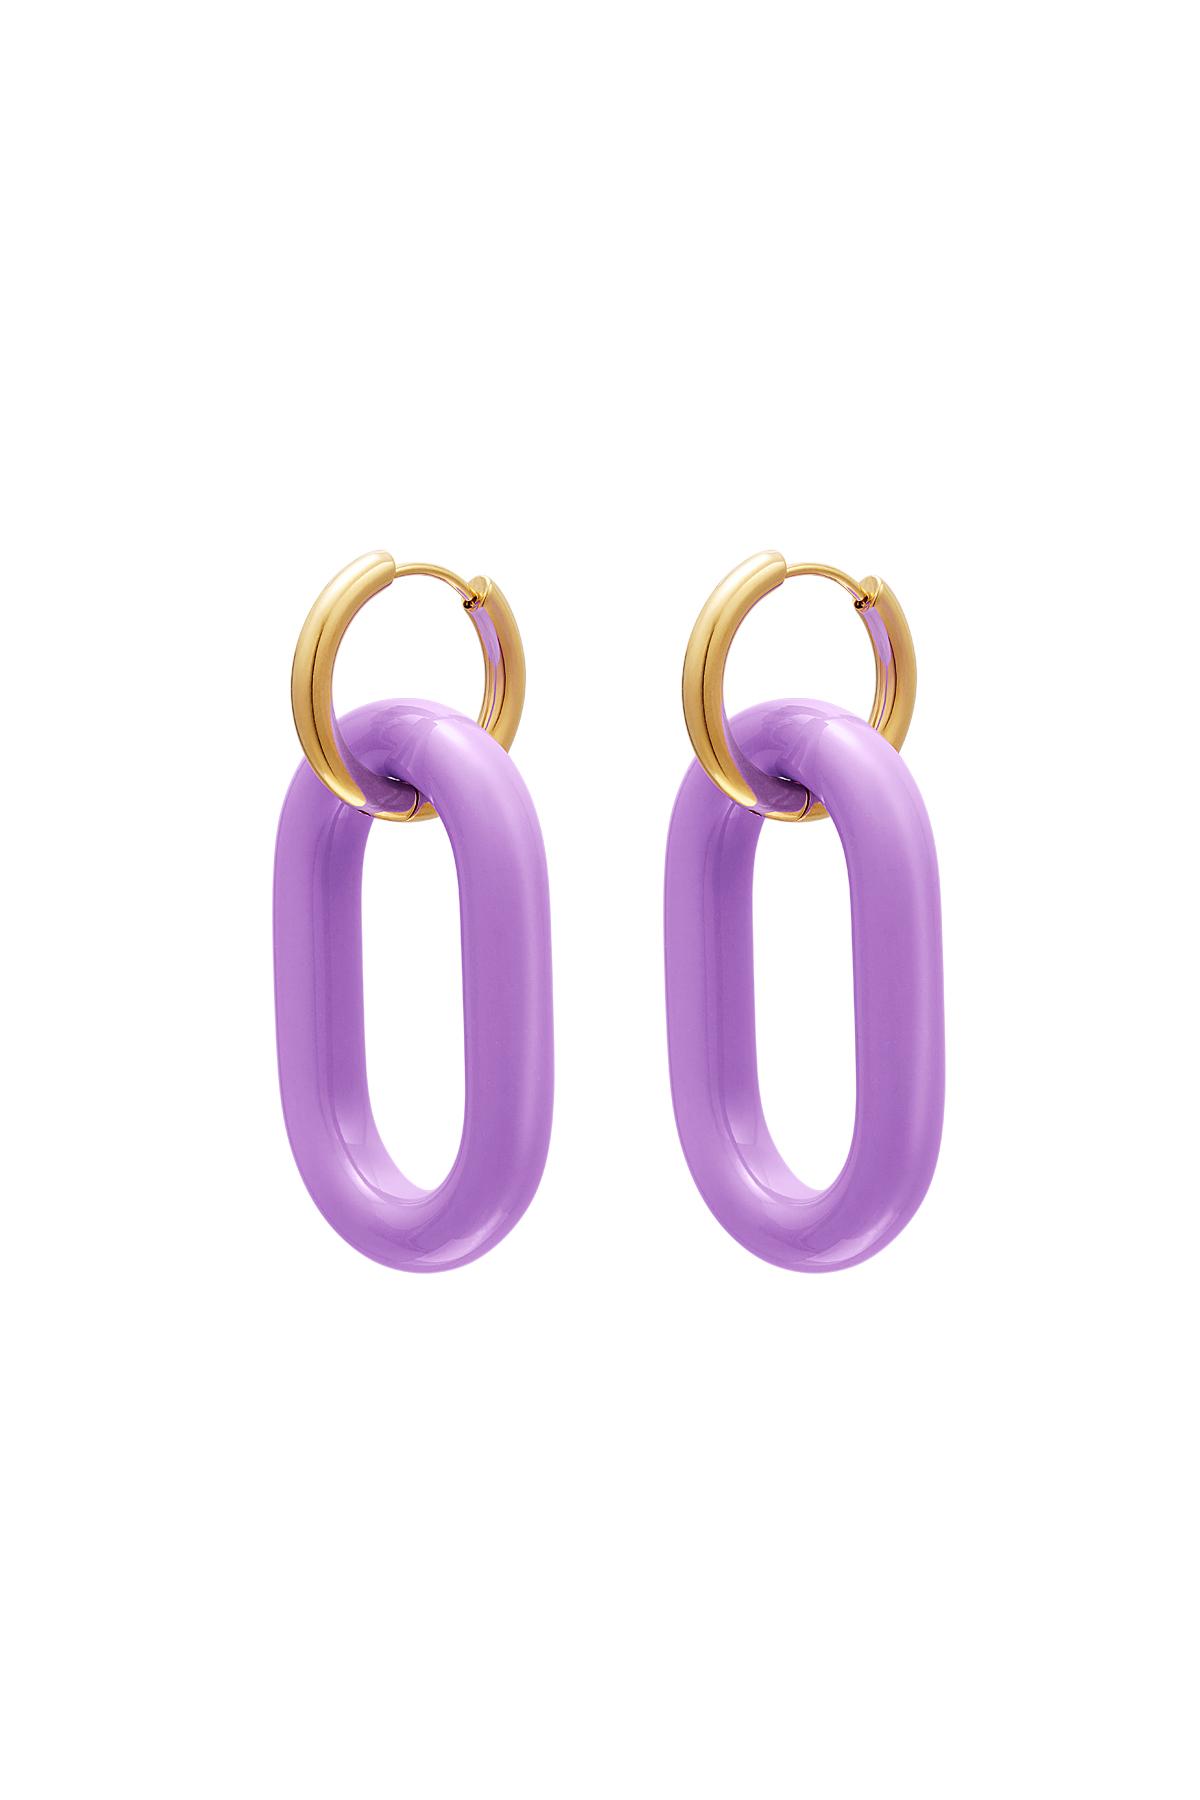 Colourful anchor link earrings - #summergirls collection Purple Stainless Steel